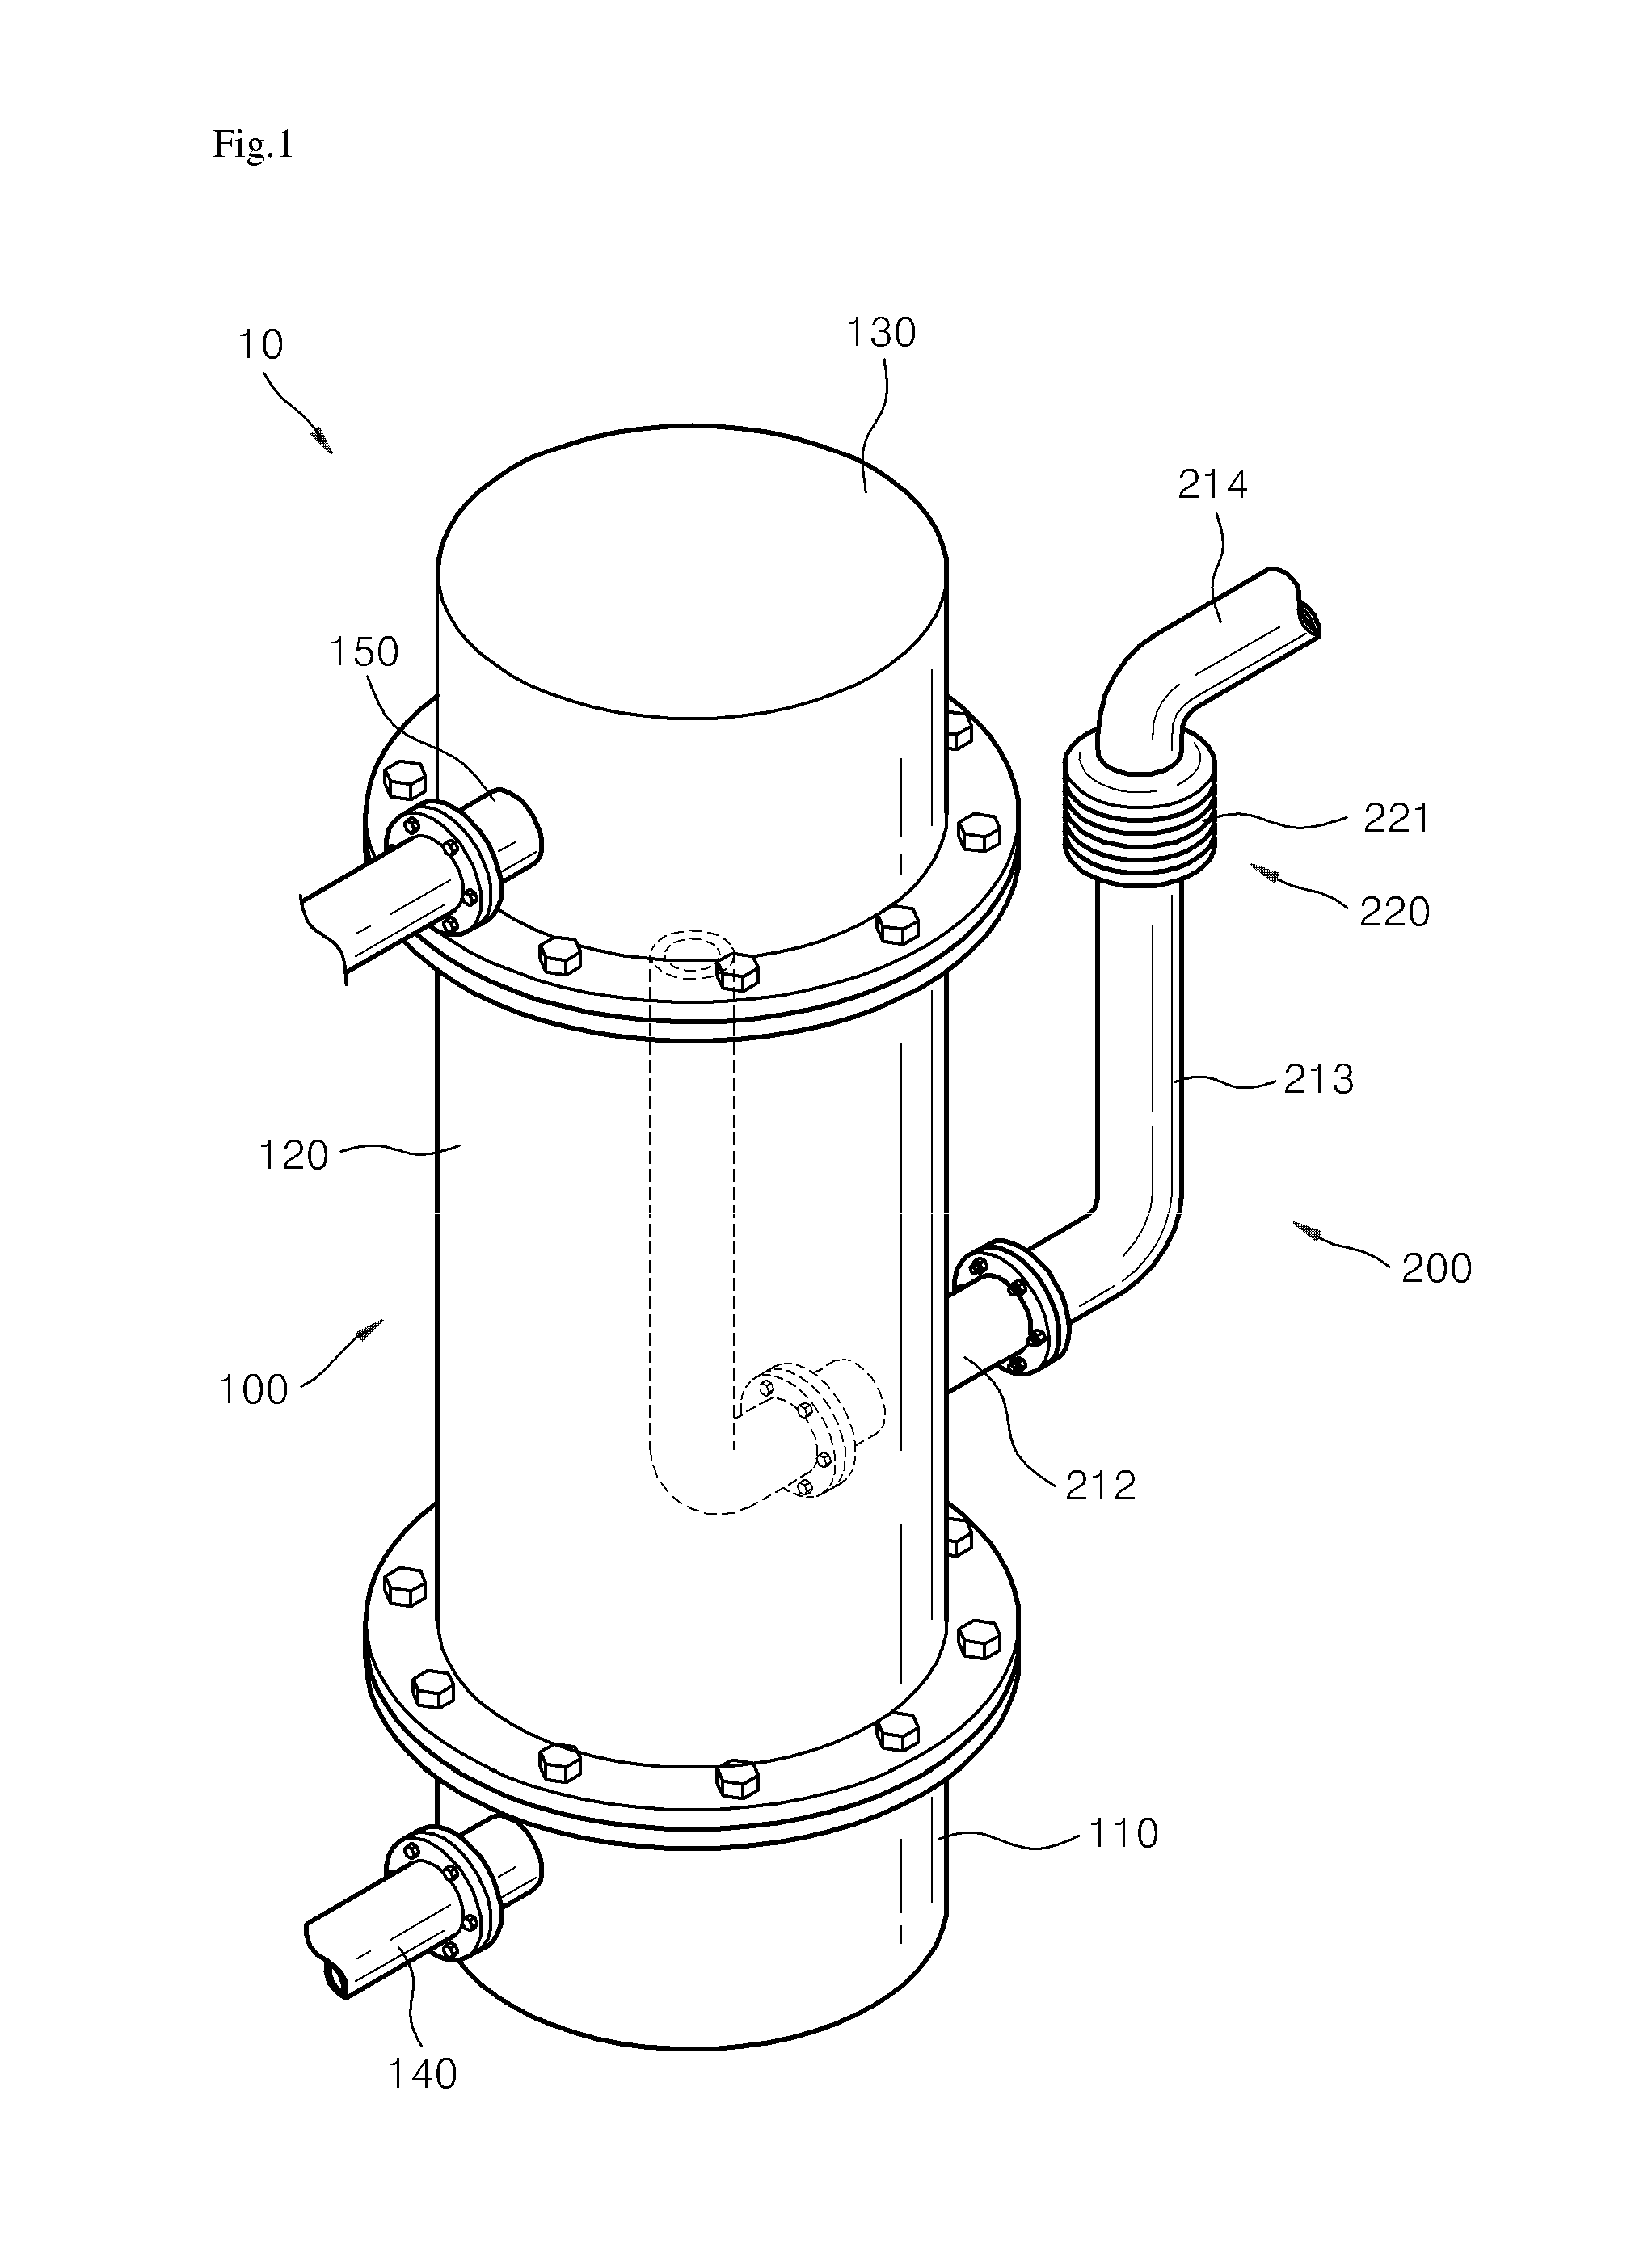 Apparatus for separating and collecting oil spilled in ocean